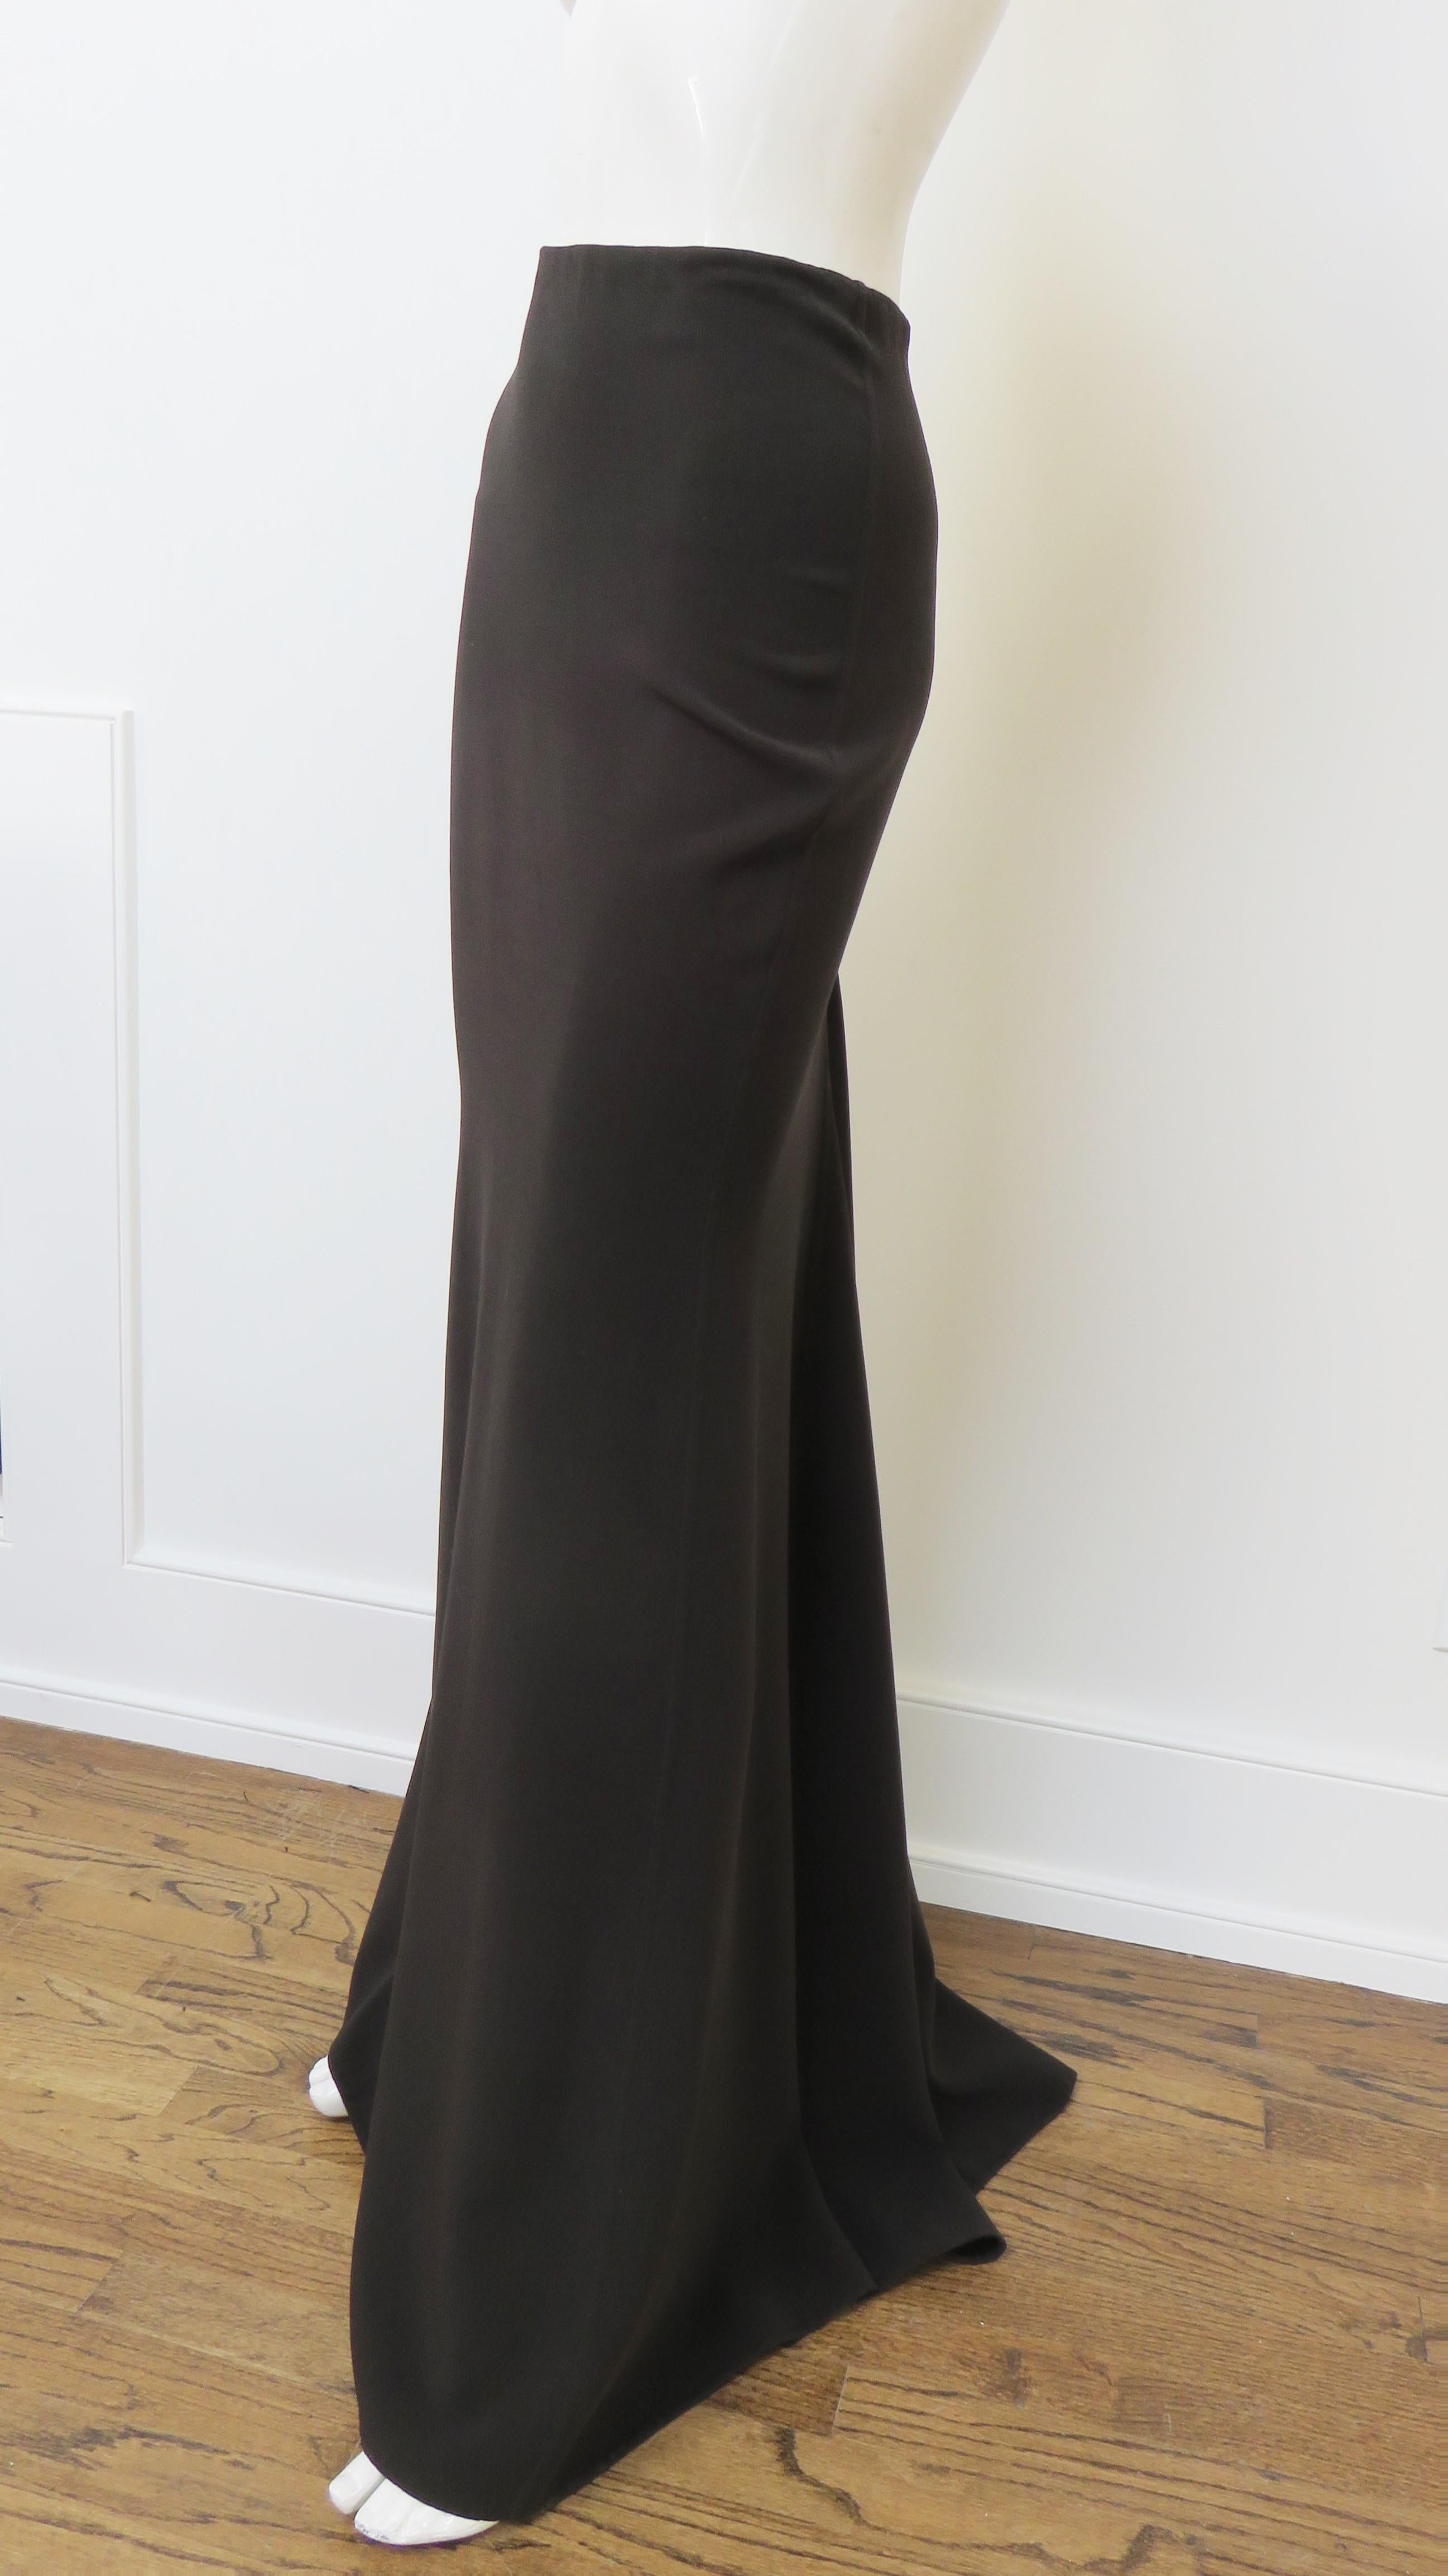 Micheal Kors Wool Maxi Skirt with Train In Excellent Condition For Sale In Water Mill, NY